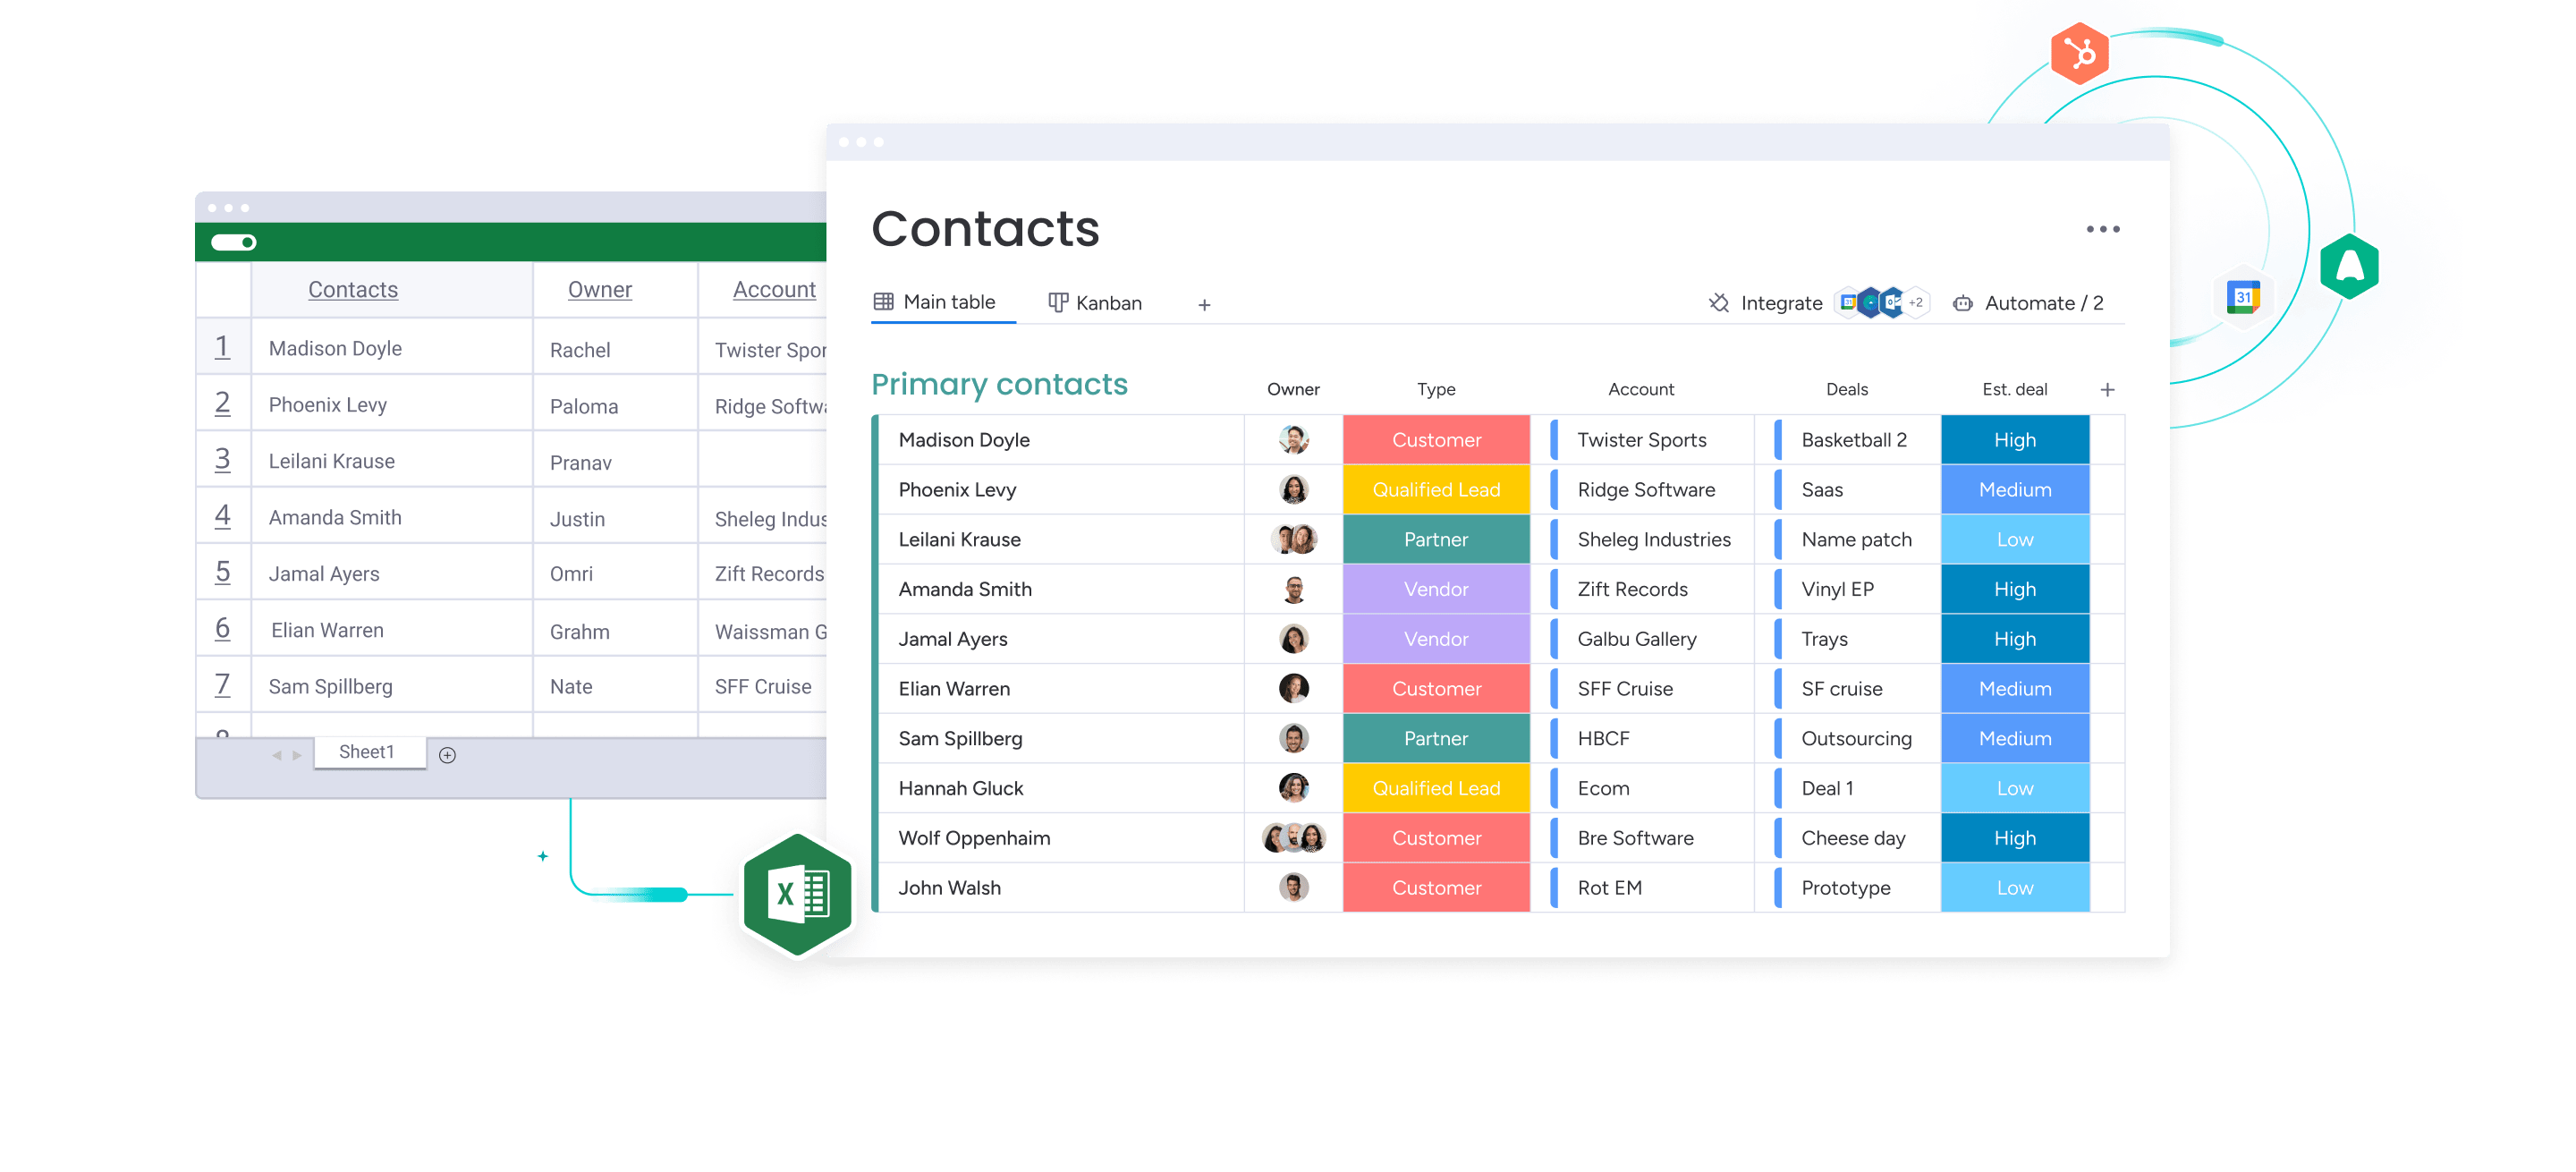 Organize data in one place